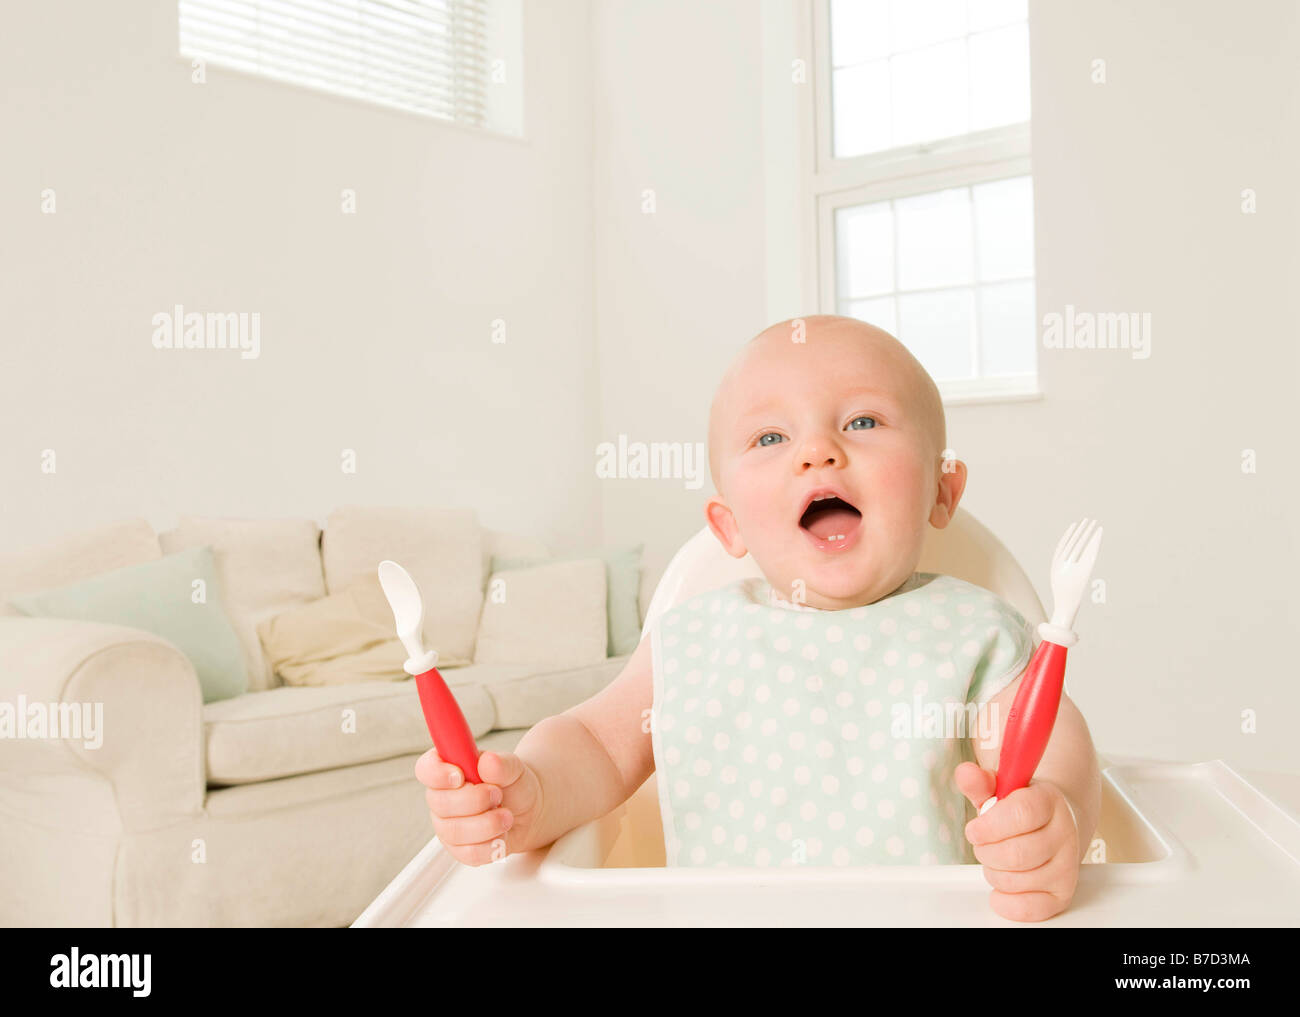 A portrait of a baby demanding food. Stock Photo